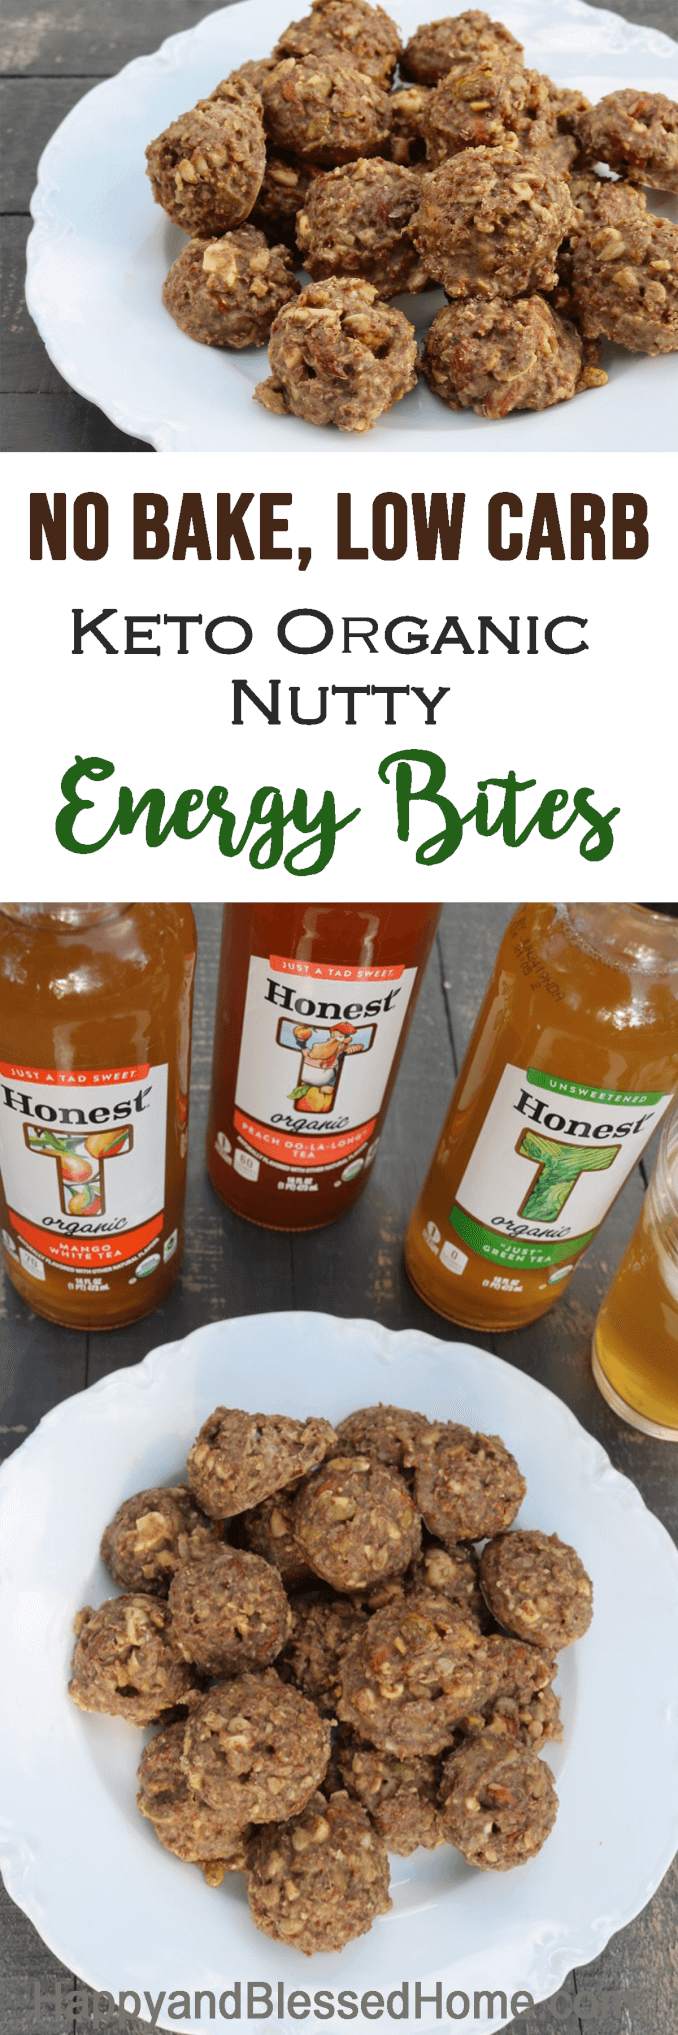 No Bake Low Carb Keto Organic Energy Bites with Mixed Nuts